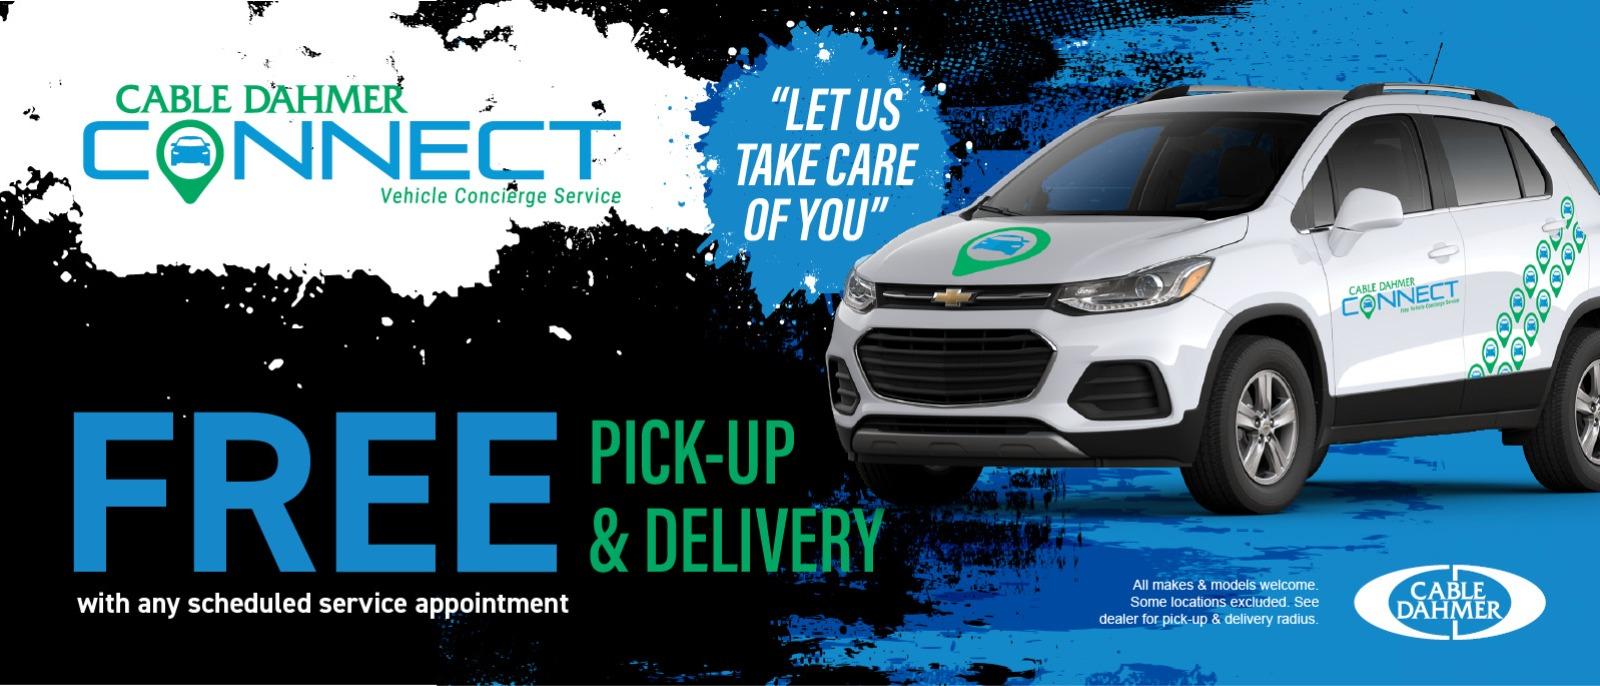 Free Pick-Up and Delivery with any scheduled service appointment with Cable Dahmer Connect